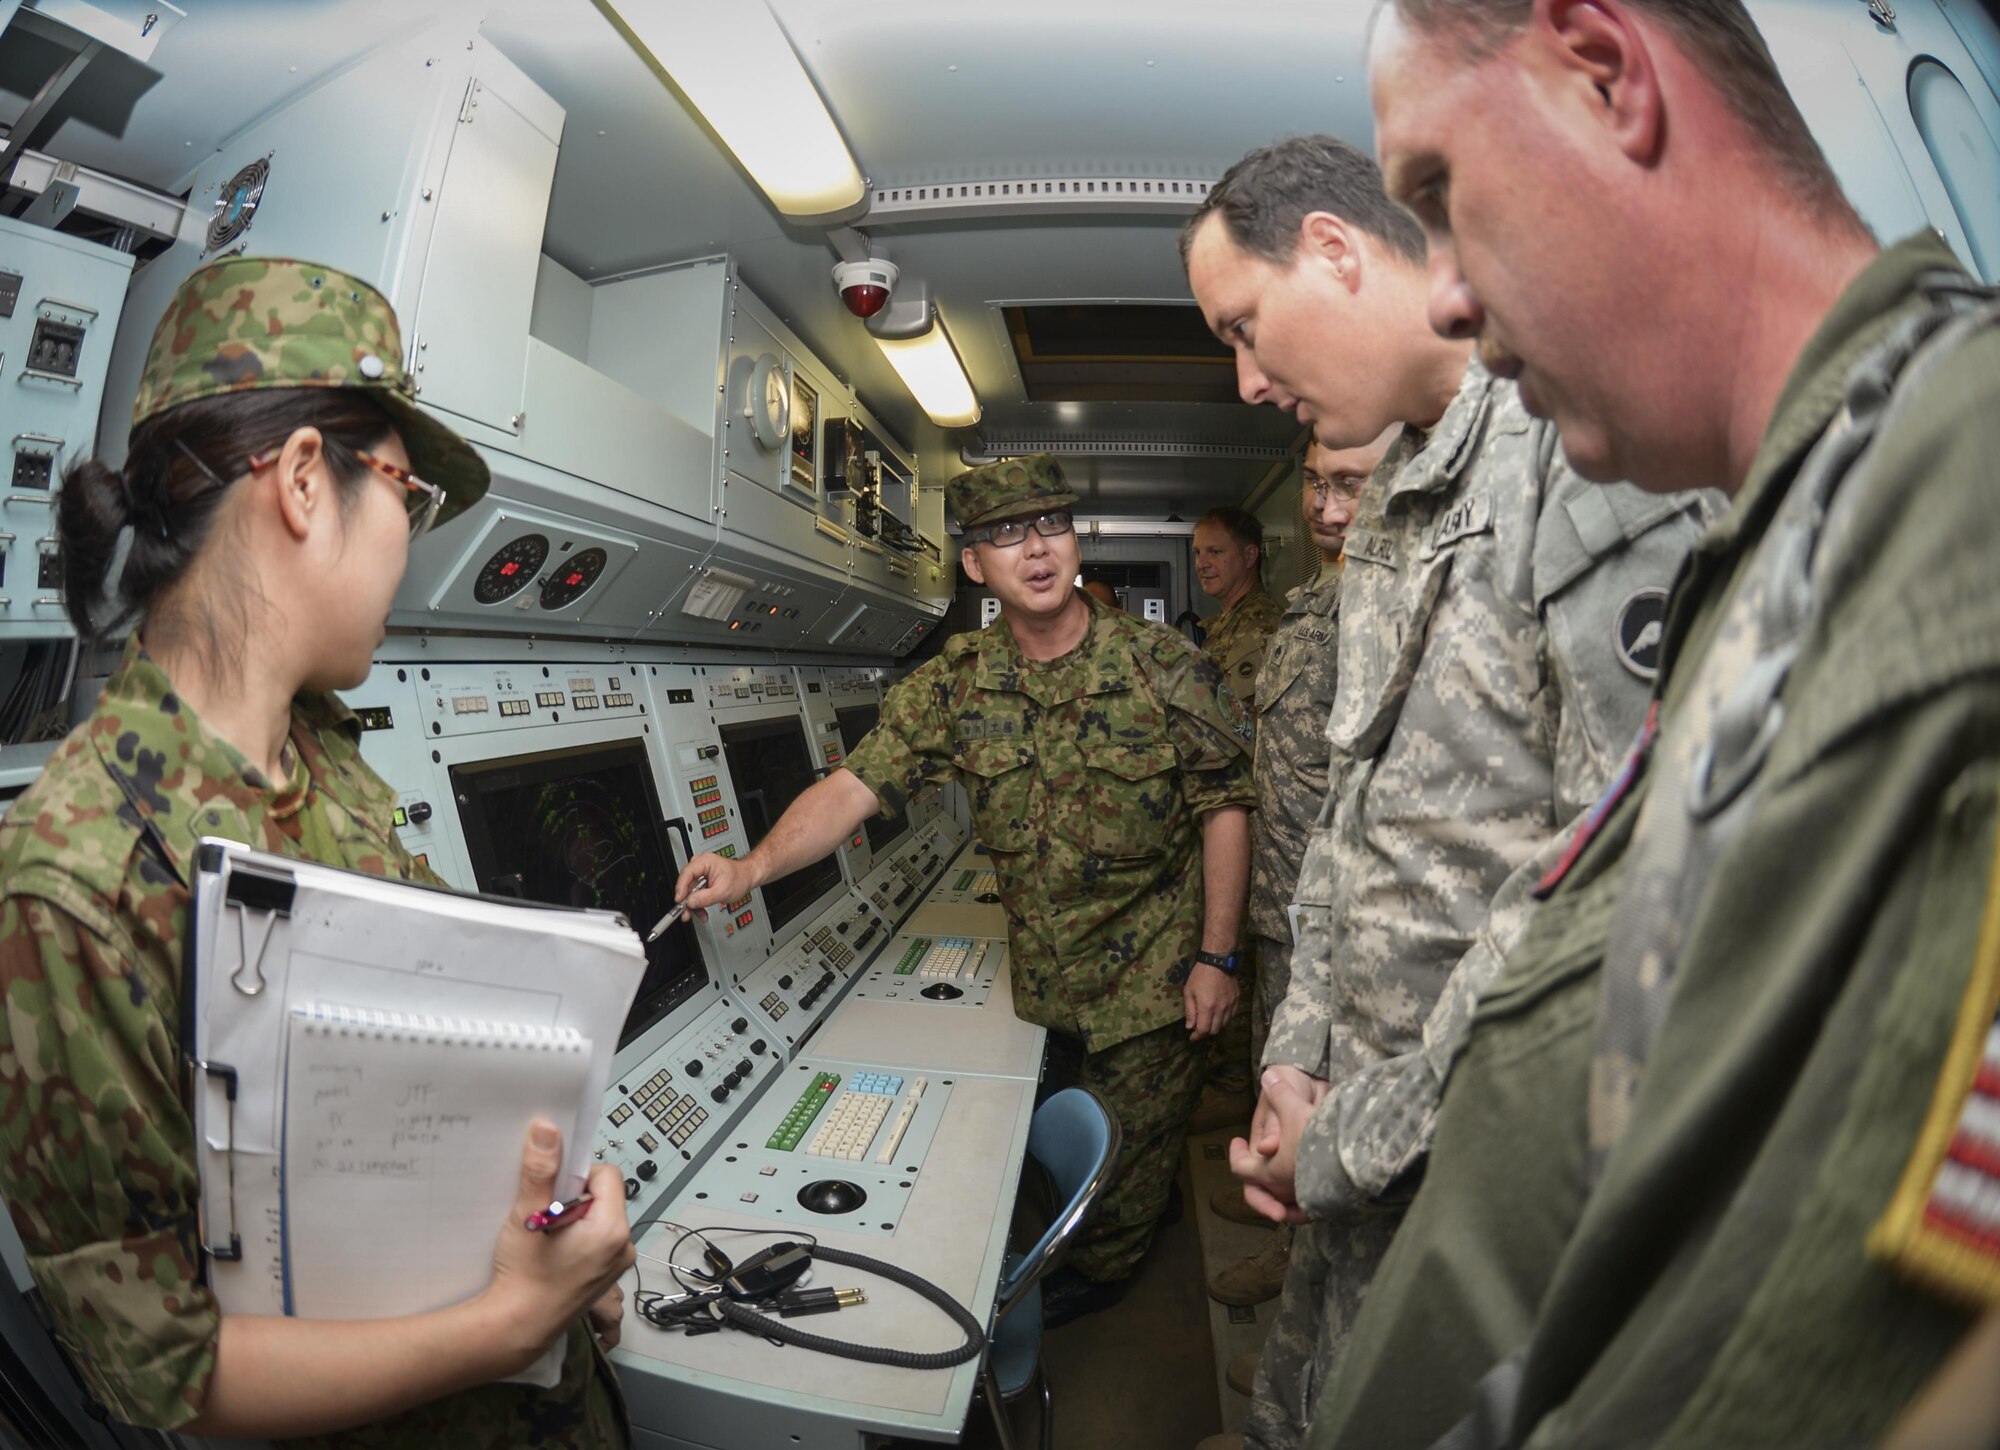 Members of the Japan Ground Self-Defense Force explain the radar display component of the P-20 mobile air traffic control system to members of the U.S Army and Air Force at Camp Tachikawa, July 26, 2016. Members of the JGSDF invited the U.S. Army Aviation Battalion and the 459th Airlift Squadron to attend the 2nd Tachikawa Helicopter Conference, where participants learned about the P-20, part of a new disaster response strategy for helicopters. (U.S. Air Force photo by Airman 1st Class Elizabeth Baker/Released)